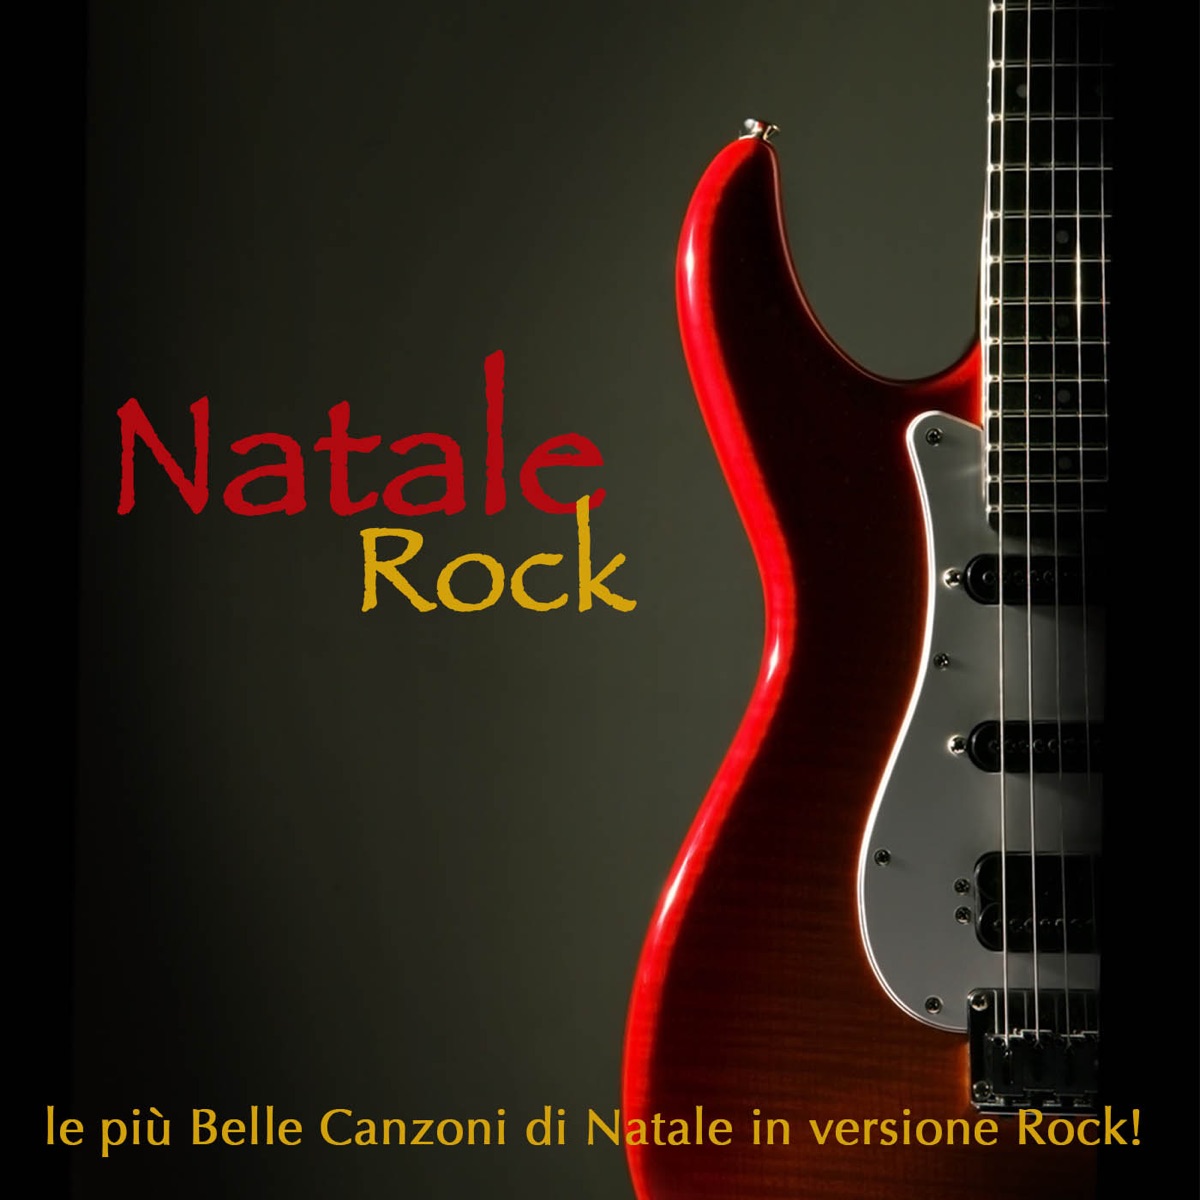 Natale Rock: le più Belle Canzoni di Natale in versione Rock! by Natale  Rock Band on Apple Music